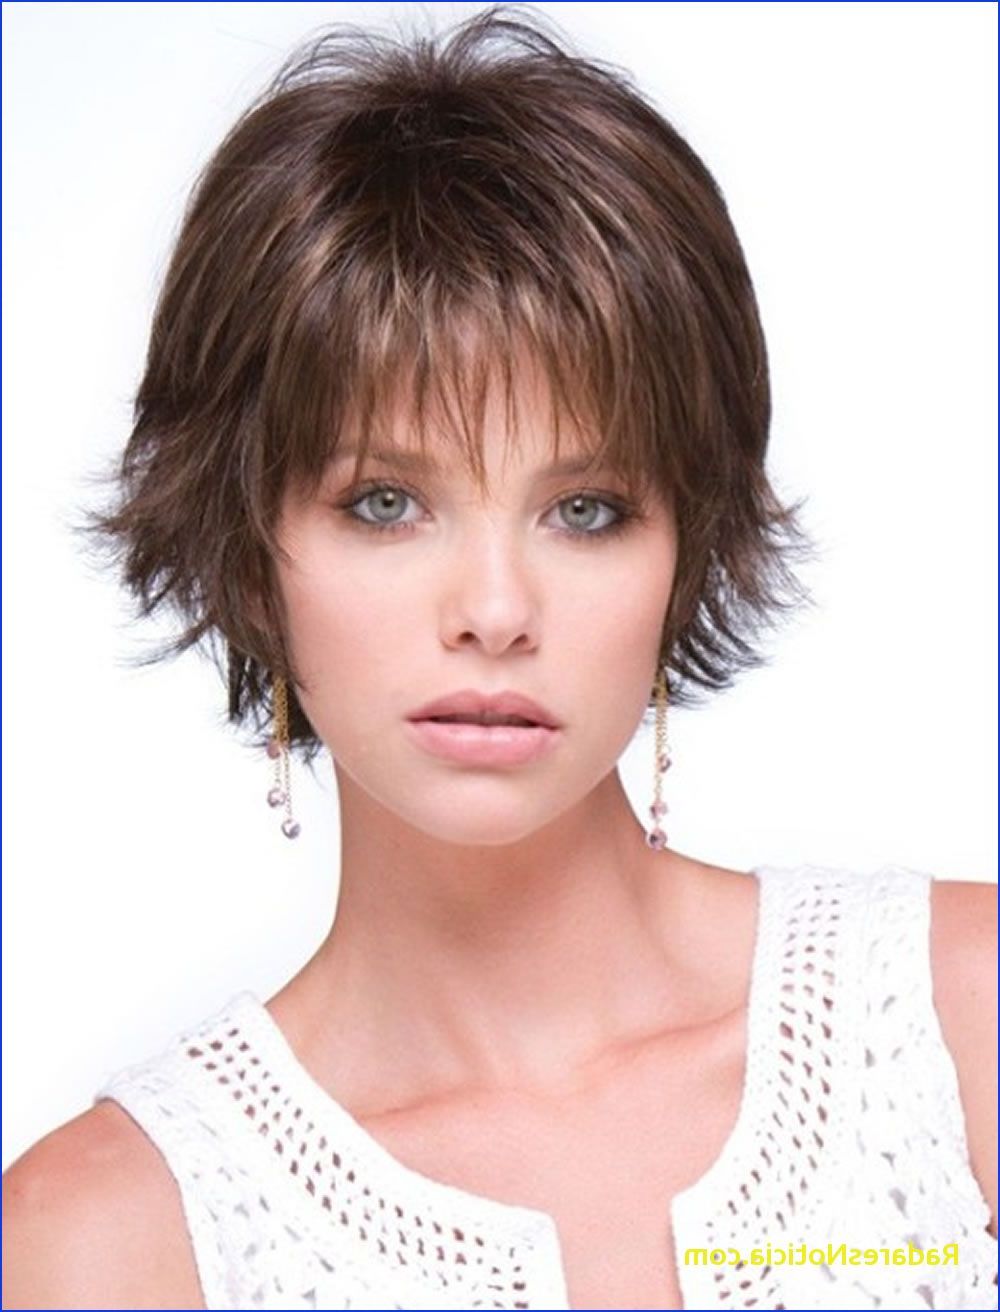 Short Hairstyles For Round Faces Short Haircuts For Round Face Thin Pertaining To Short Hairstyles For Thin Hair And Round Faces (View 6 of 25)